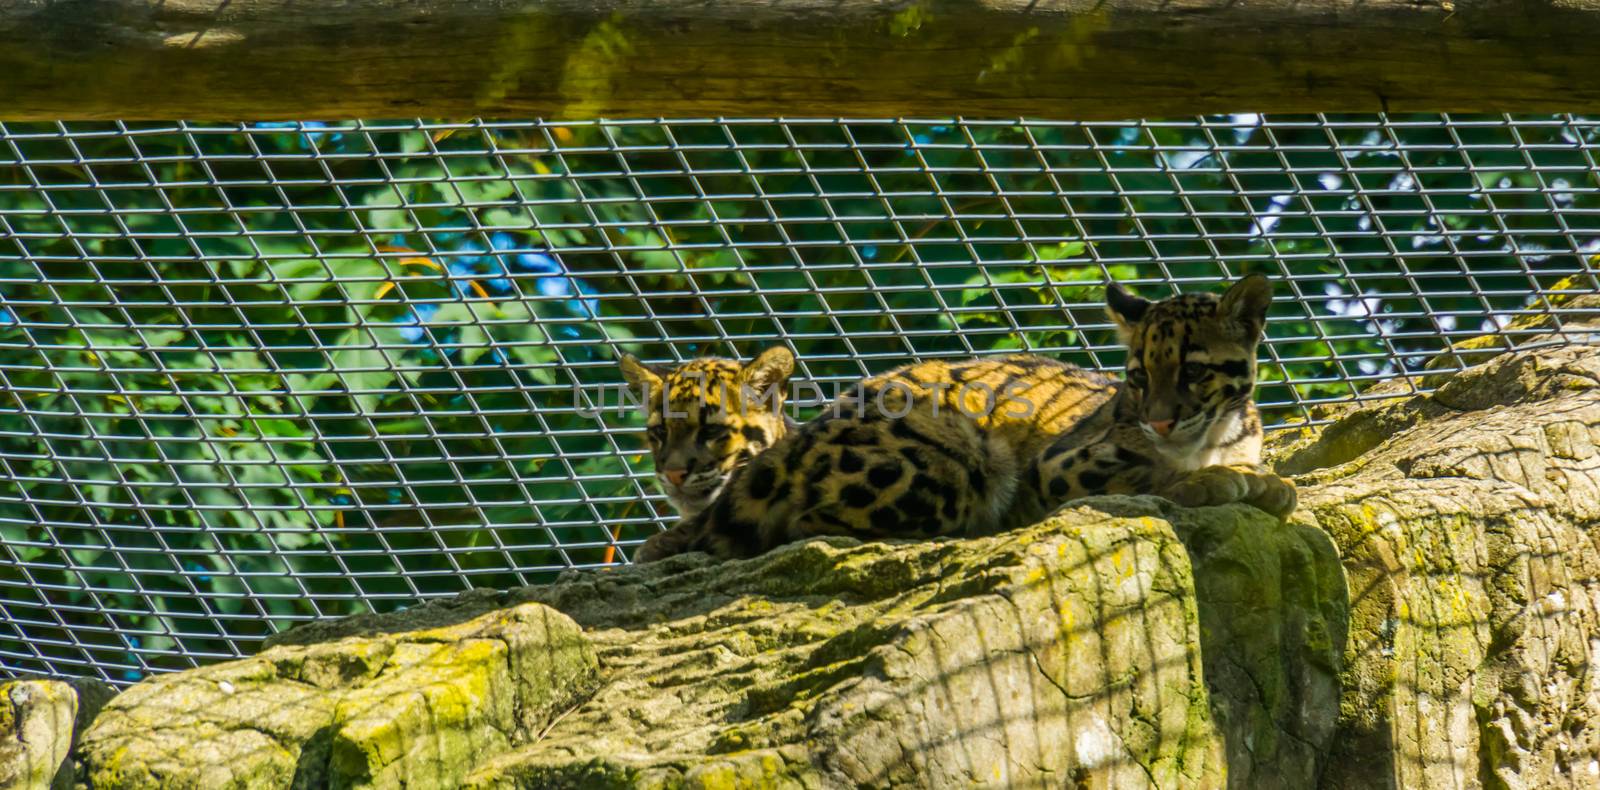 mainland clouded leopard couple sitting together on a rock, Vulnerable animal specie from the himalayas by charlottebleijenberg